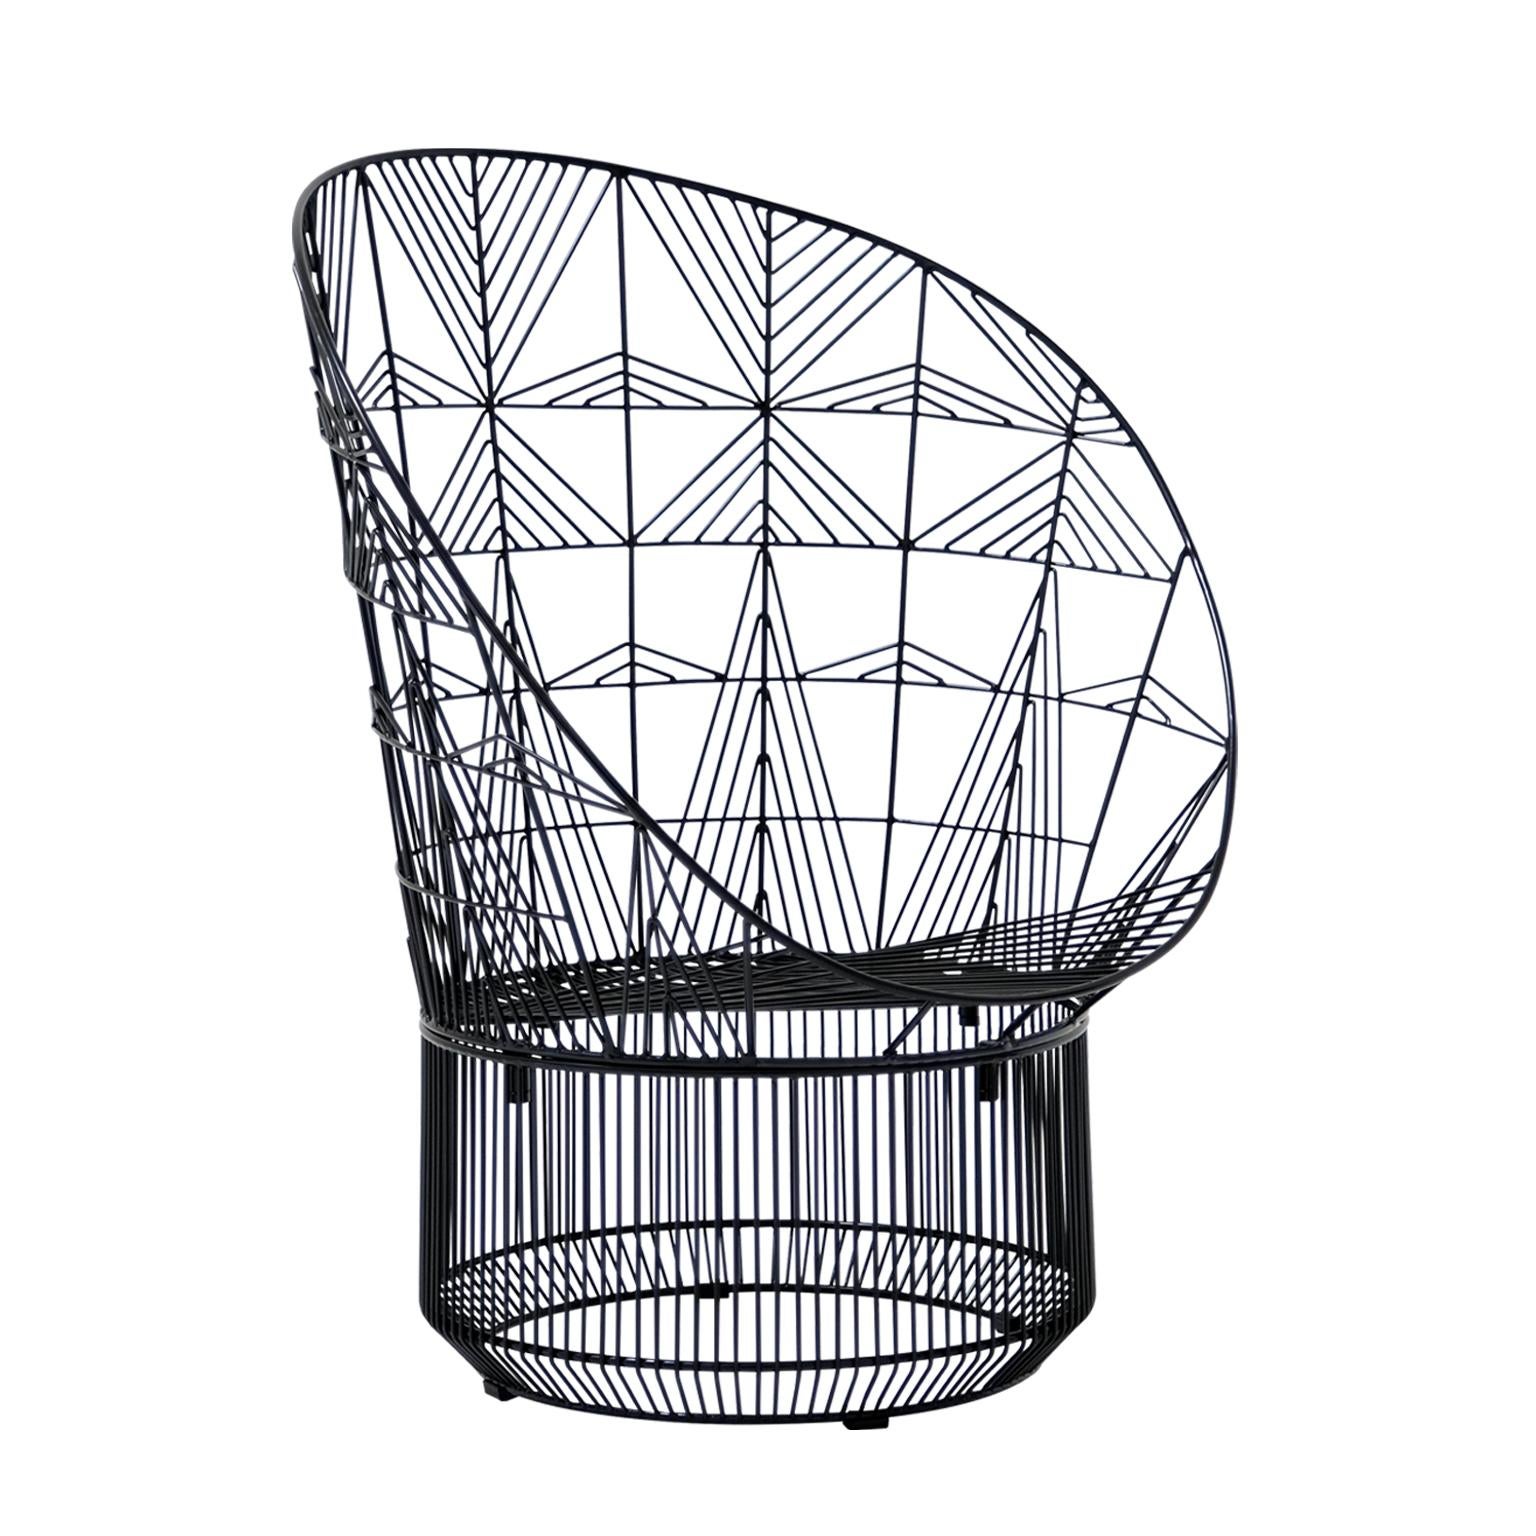 Bend Goods wire furniture
Like the feathers of a peacock, the elegant wire pattern of the peacock lounge chair makes a statement. The unique pattern expands outwards in a stunning arrangement that is eye-catching indoors or outdoors. This modern